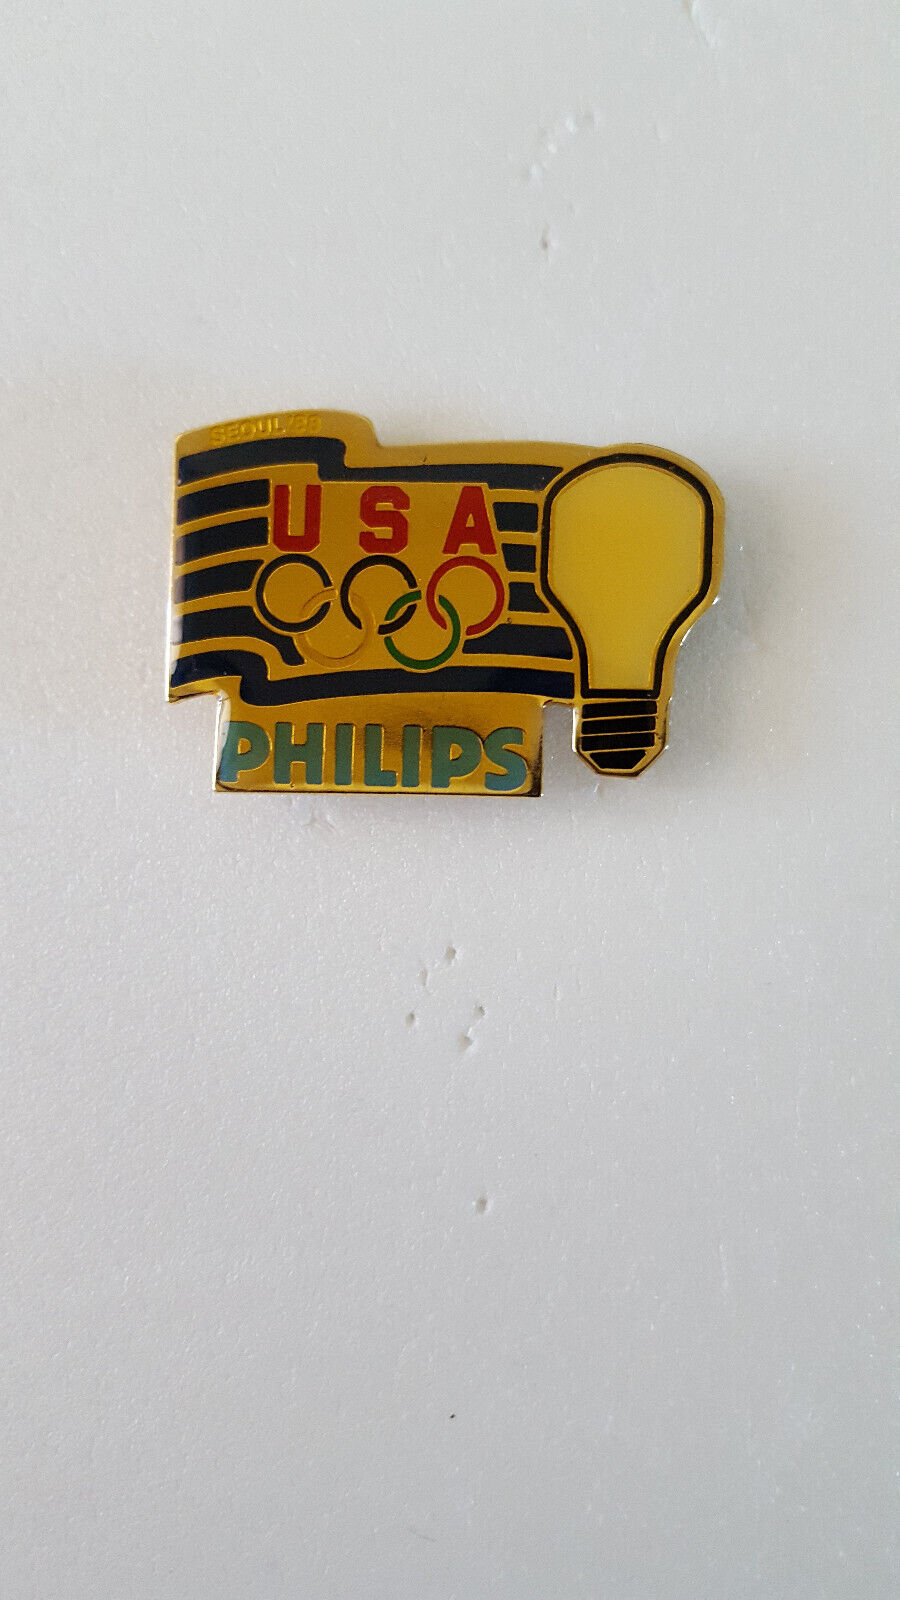 VINTAGE 1988 SEOUL OLYMPICS PHILIPS SPONSOR LAPEL PIN HAT RARE COLLECTABLE